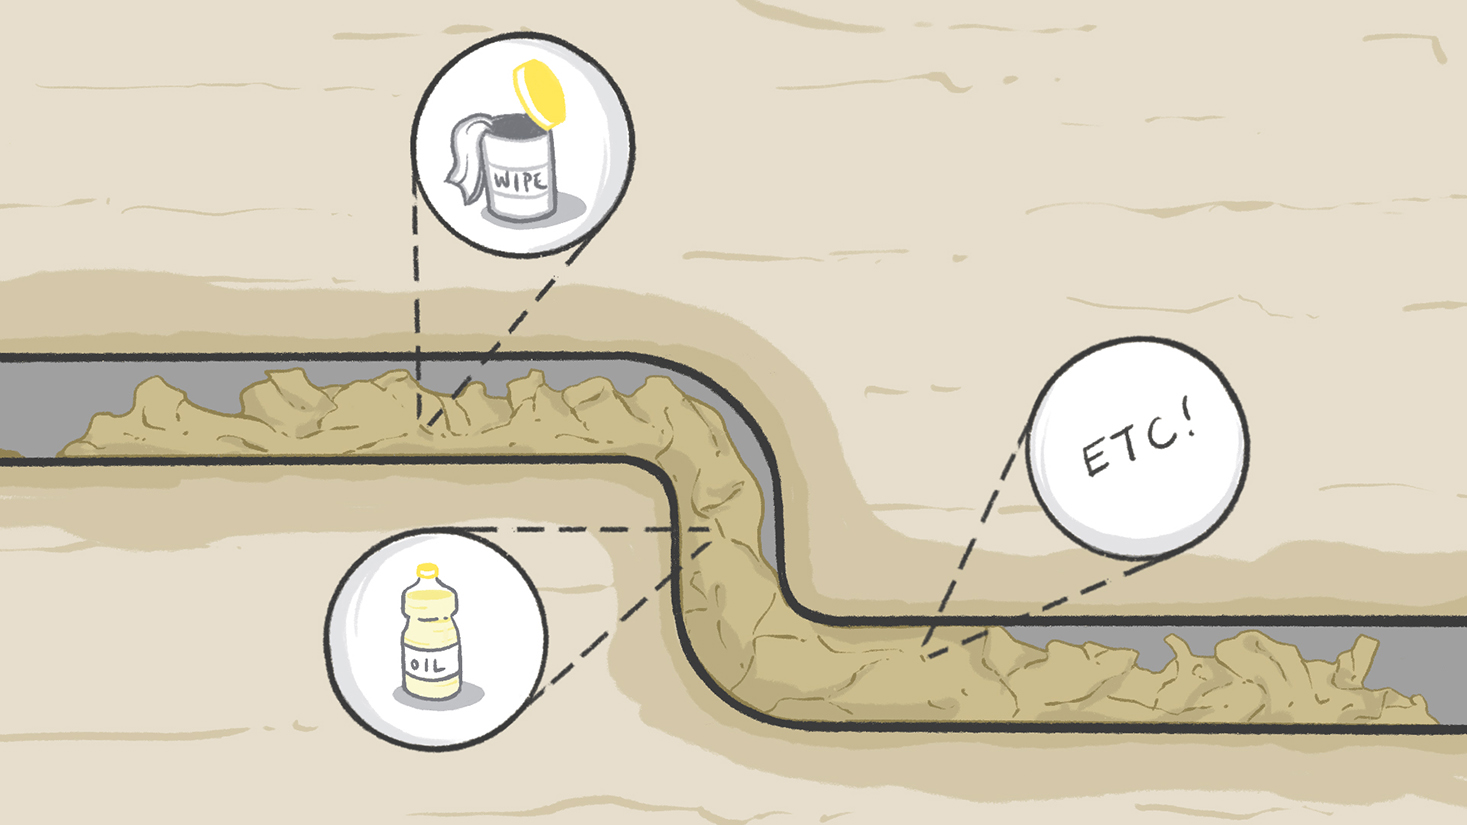 fatberg in sewer system illustration